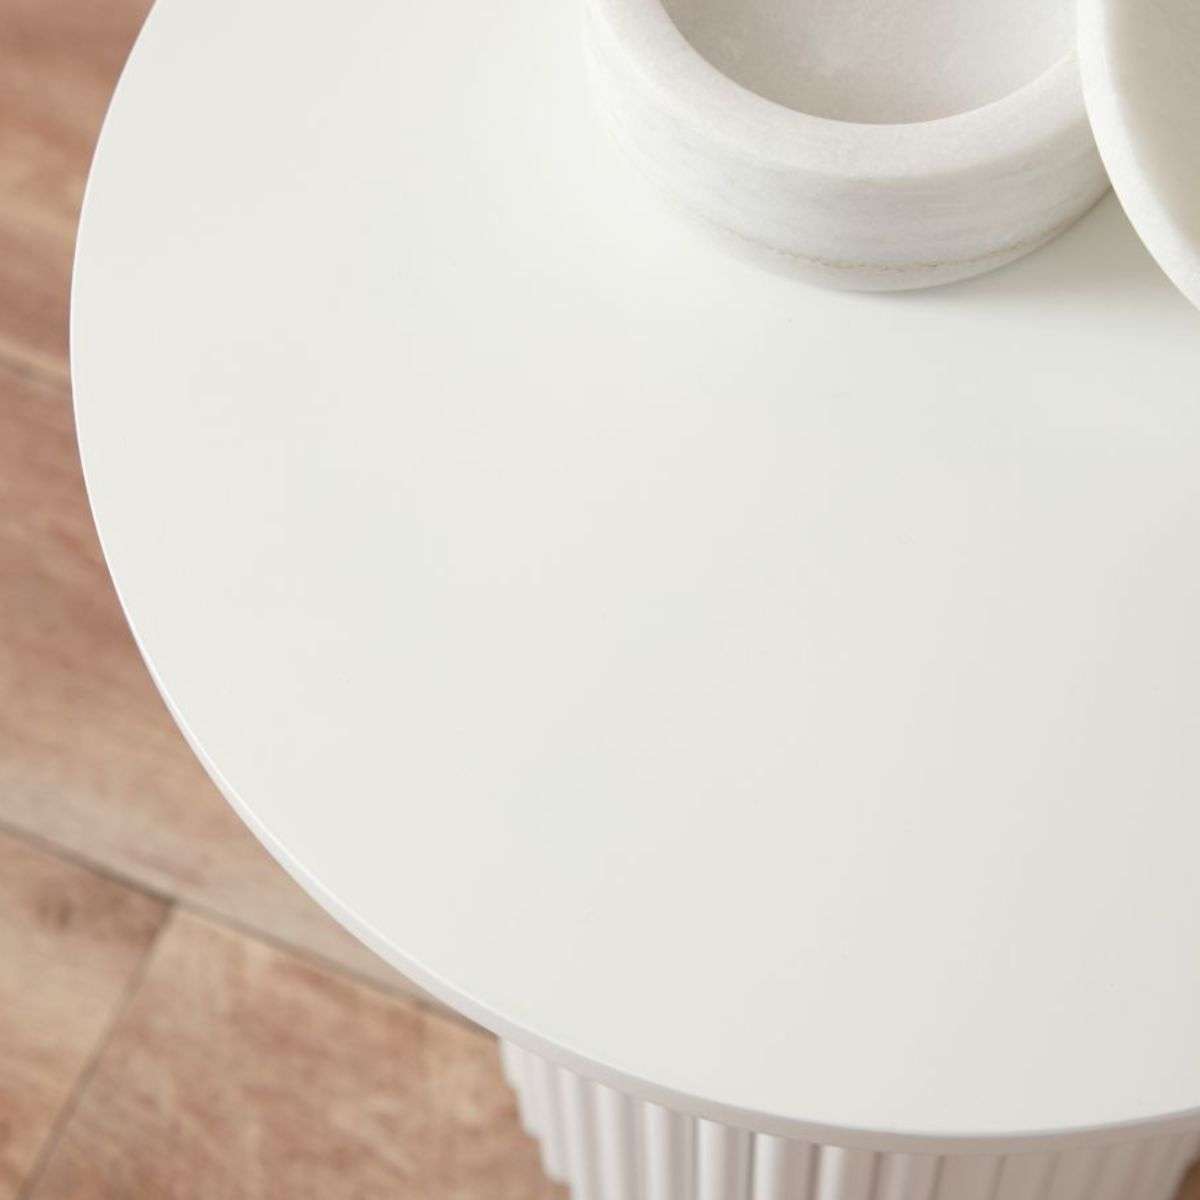 Eve Side Table - White